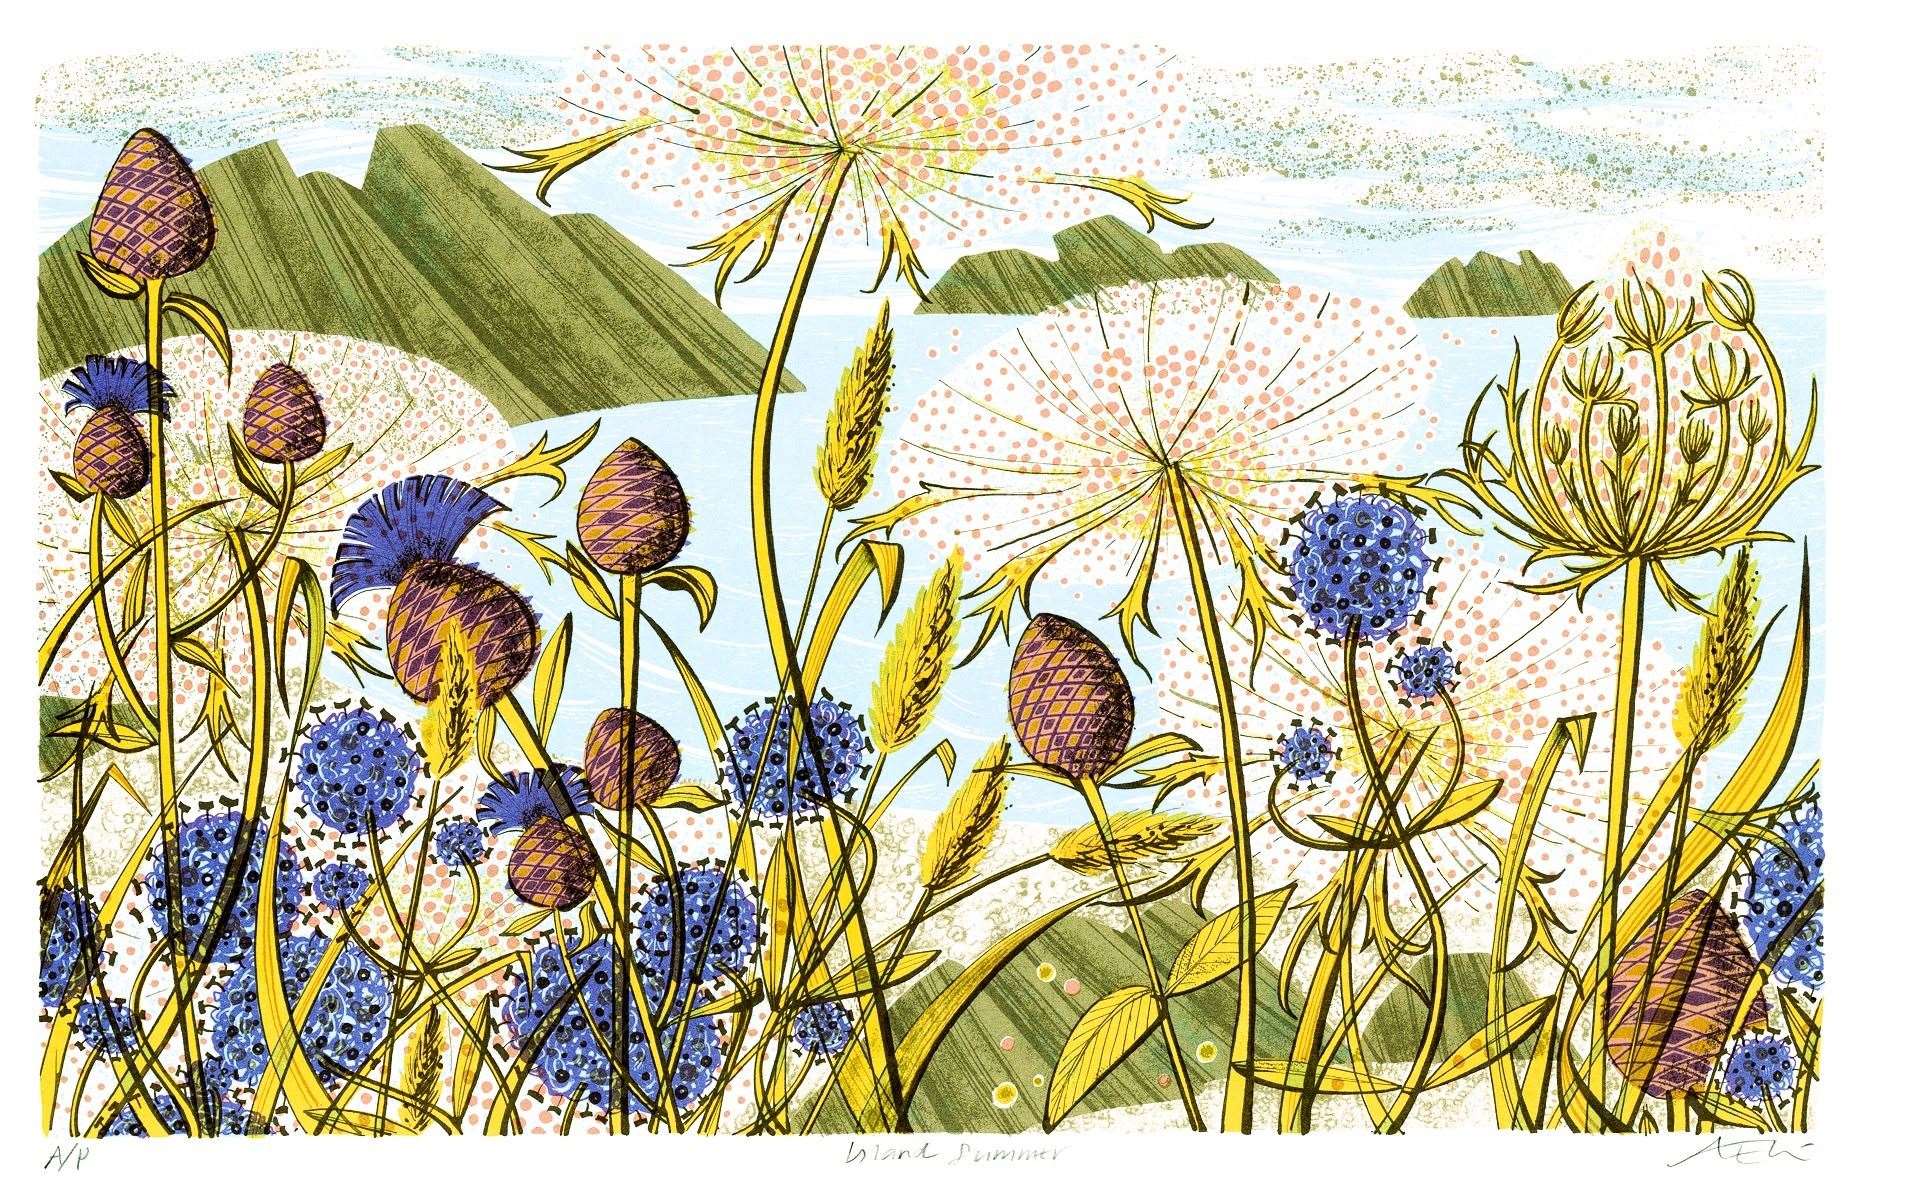 Artist Angie Lewin and author Christopher Stocks have collaborated on The Book of Wild Flowers.